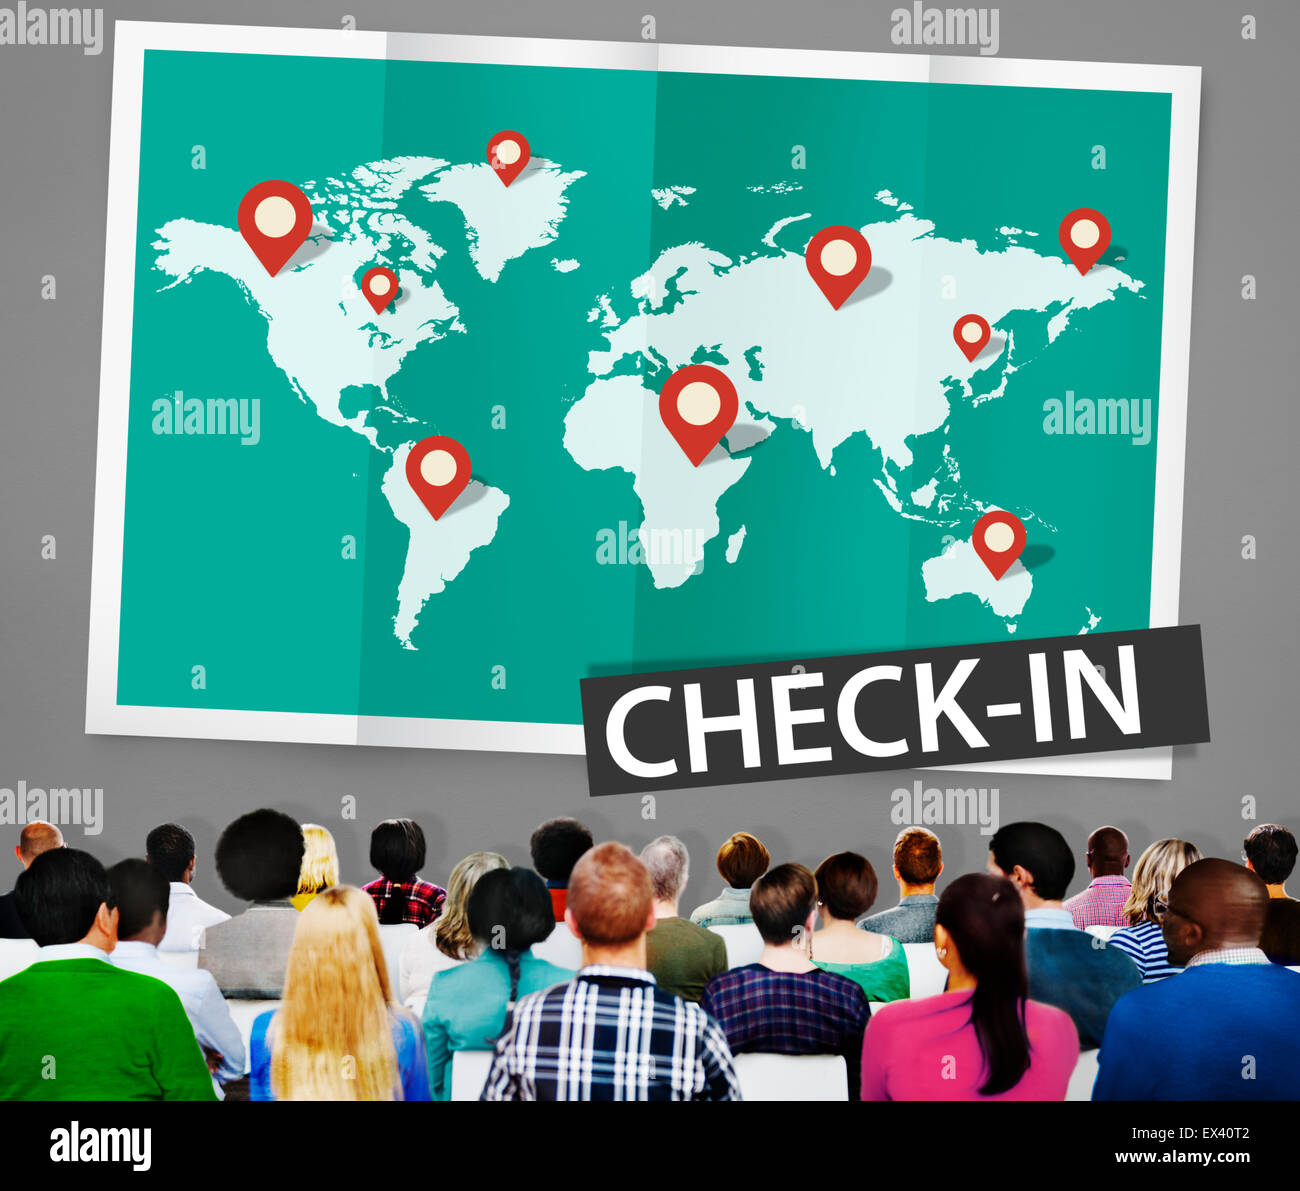 Check In Cartography Location Spot Travel World Global Concept Stock Photo